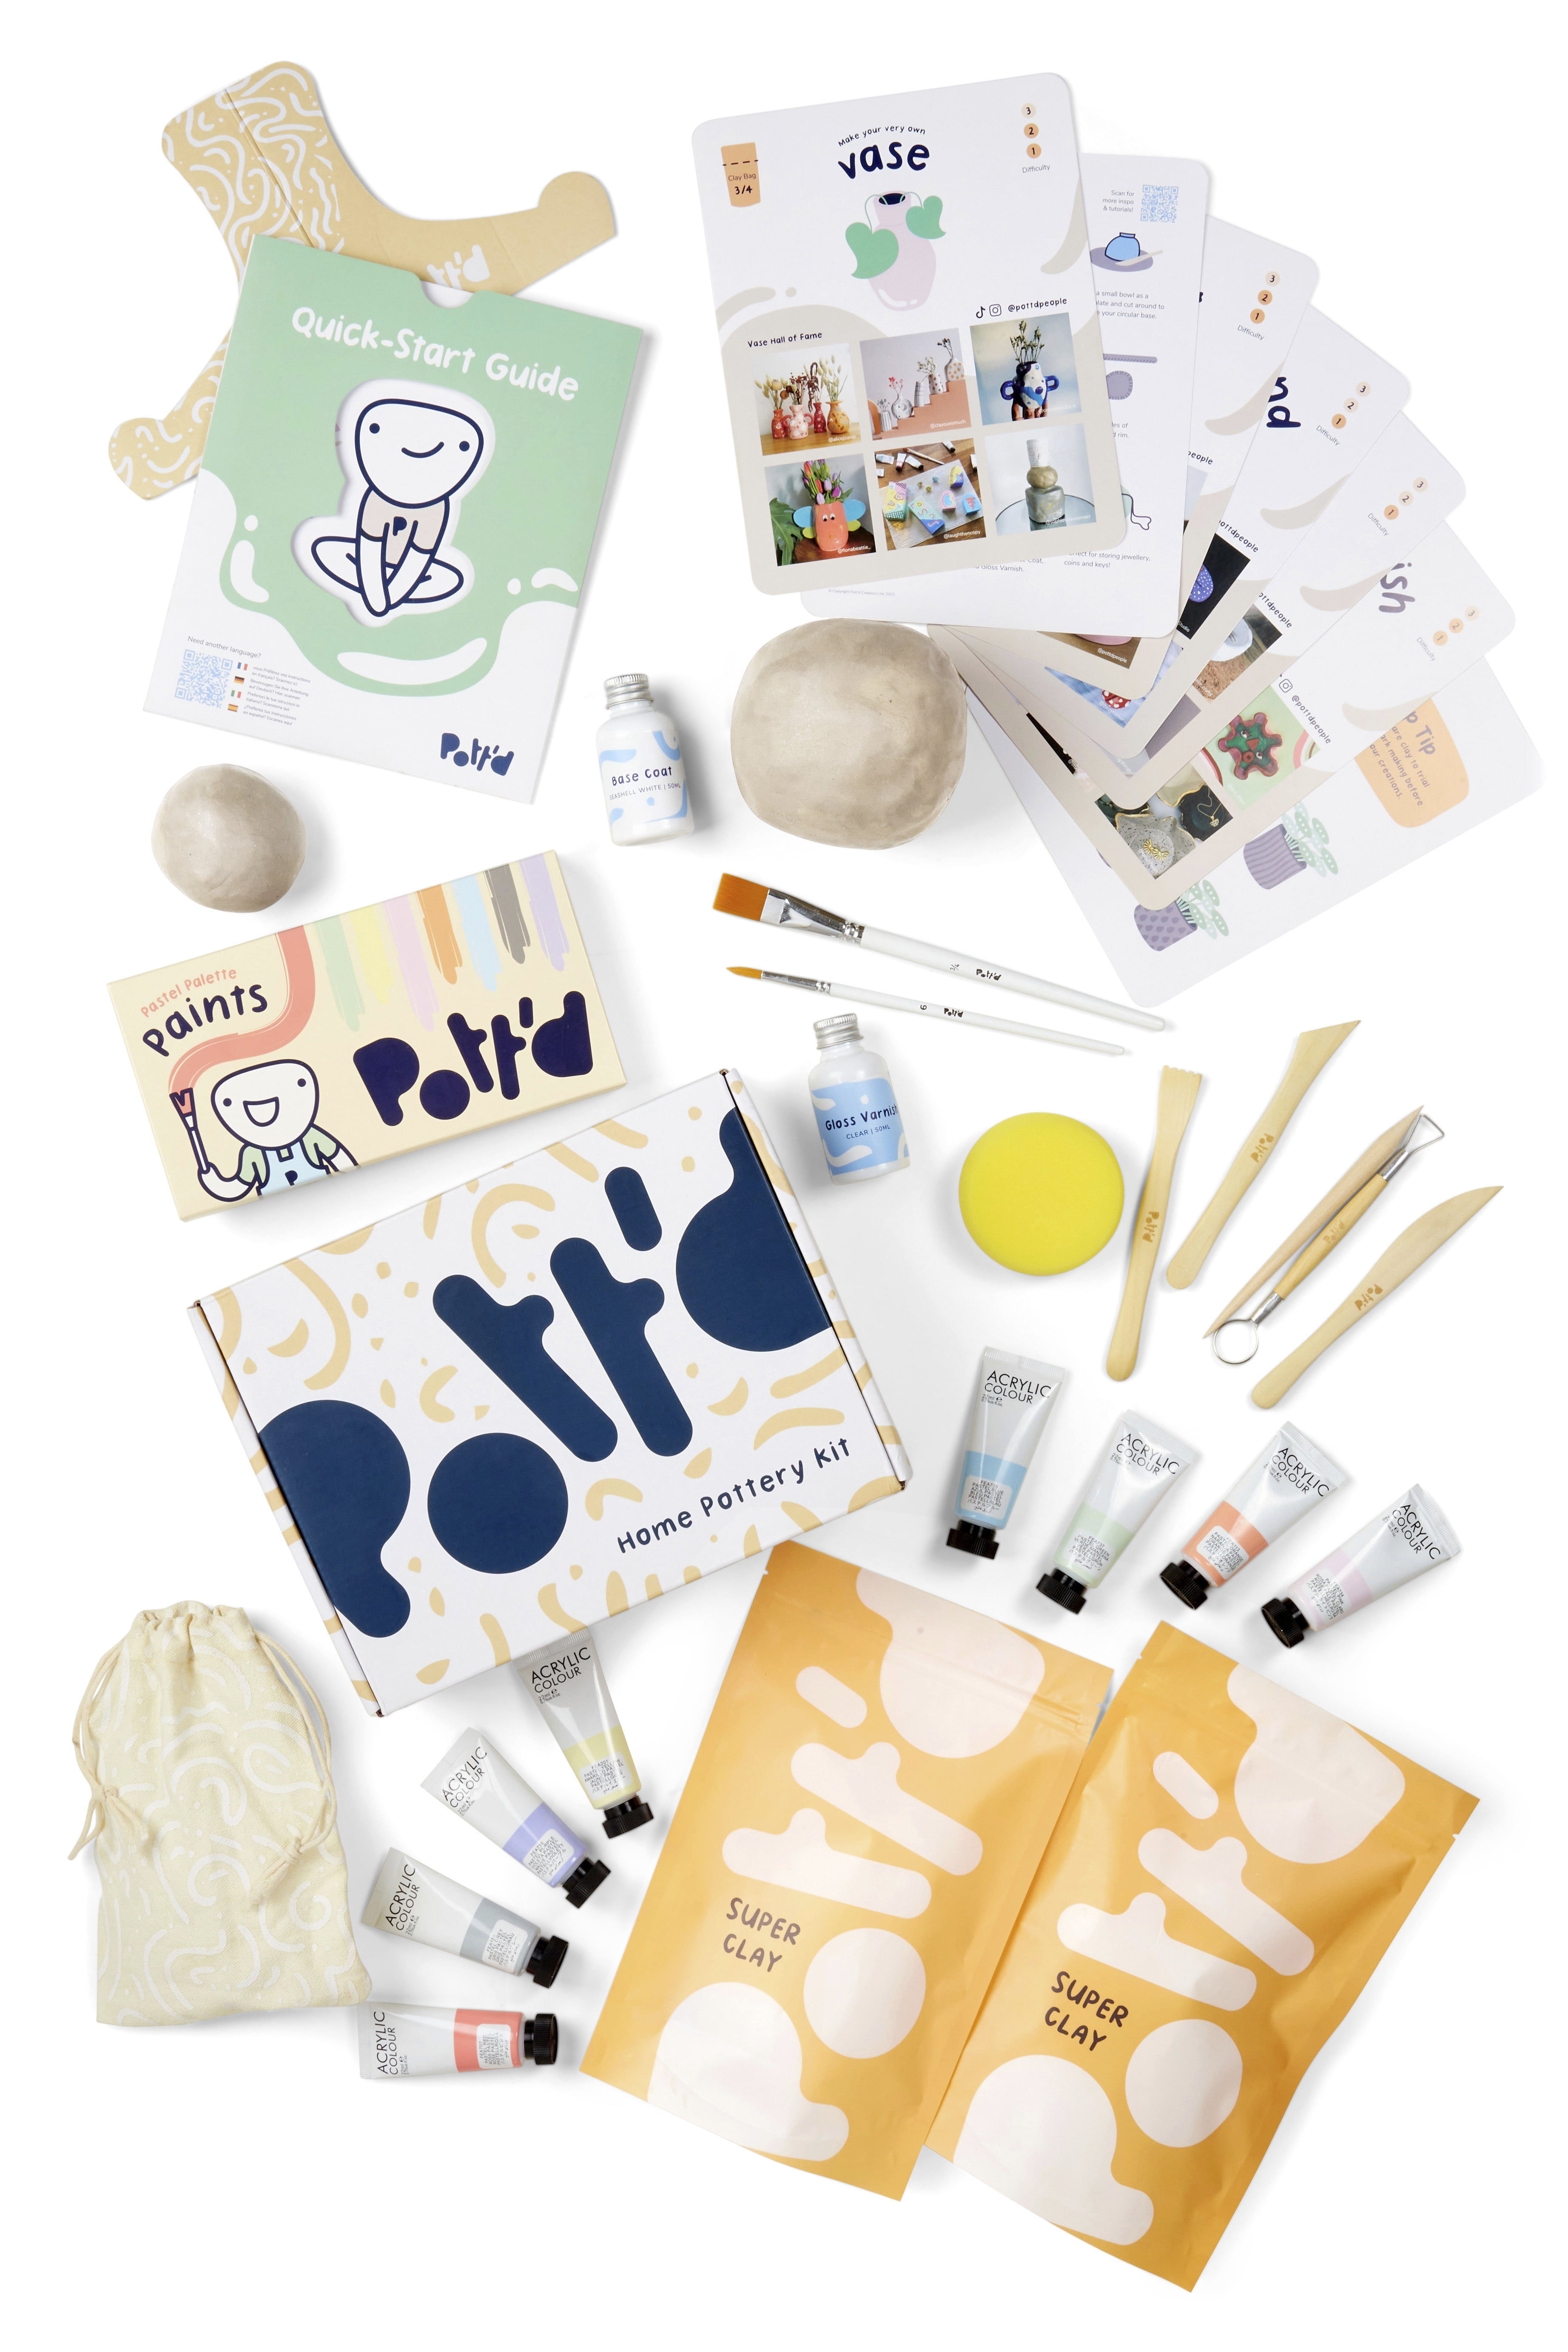 Pott'd Home Air Dry Clay Pottery Kit for Adults & Beginners, Pastel Paints